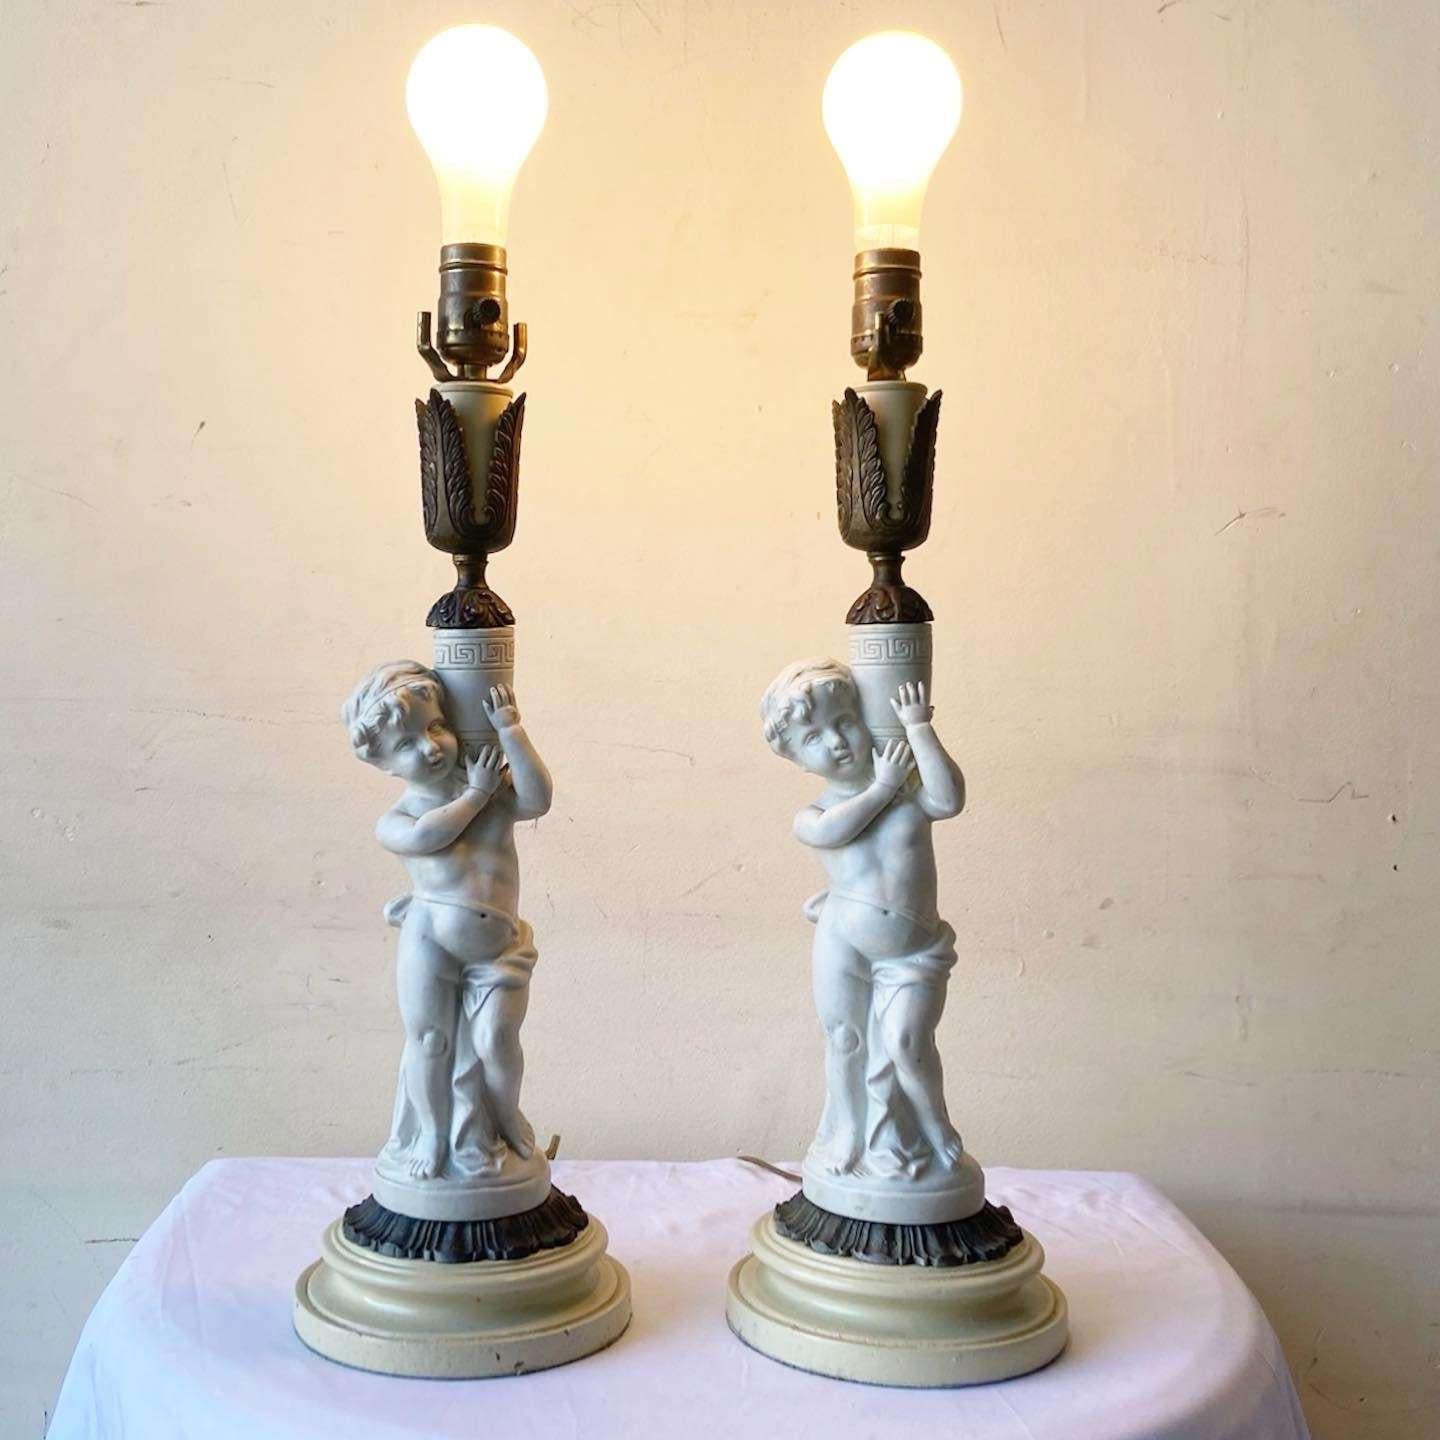 Exceptional pair of vintage ceramic Greek cherub table lamps. Feature a brass accent beneath the cherub and above the vase being held.

3 way lighting.
